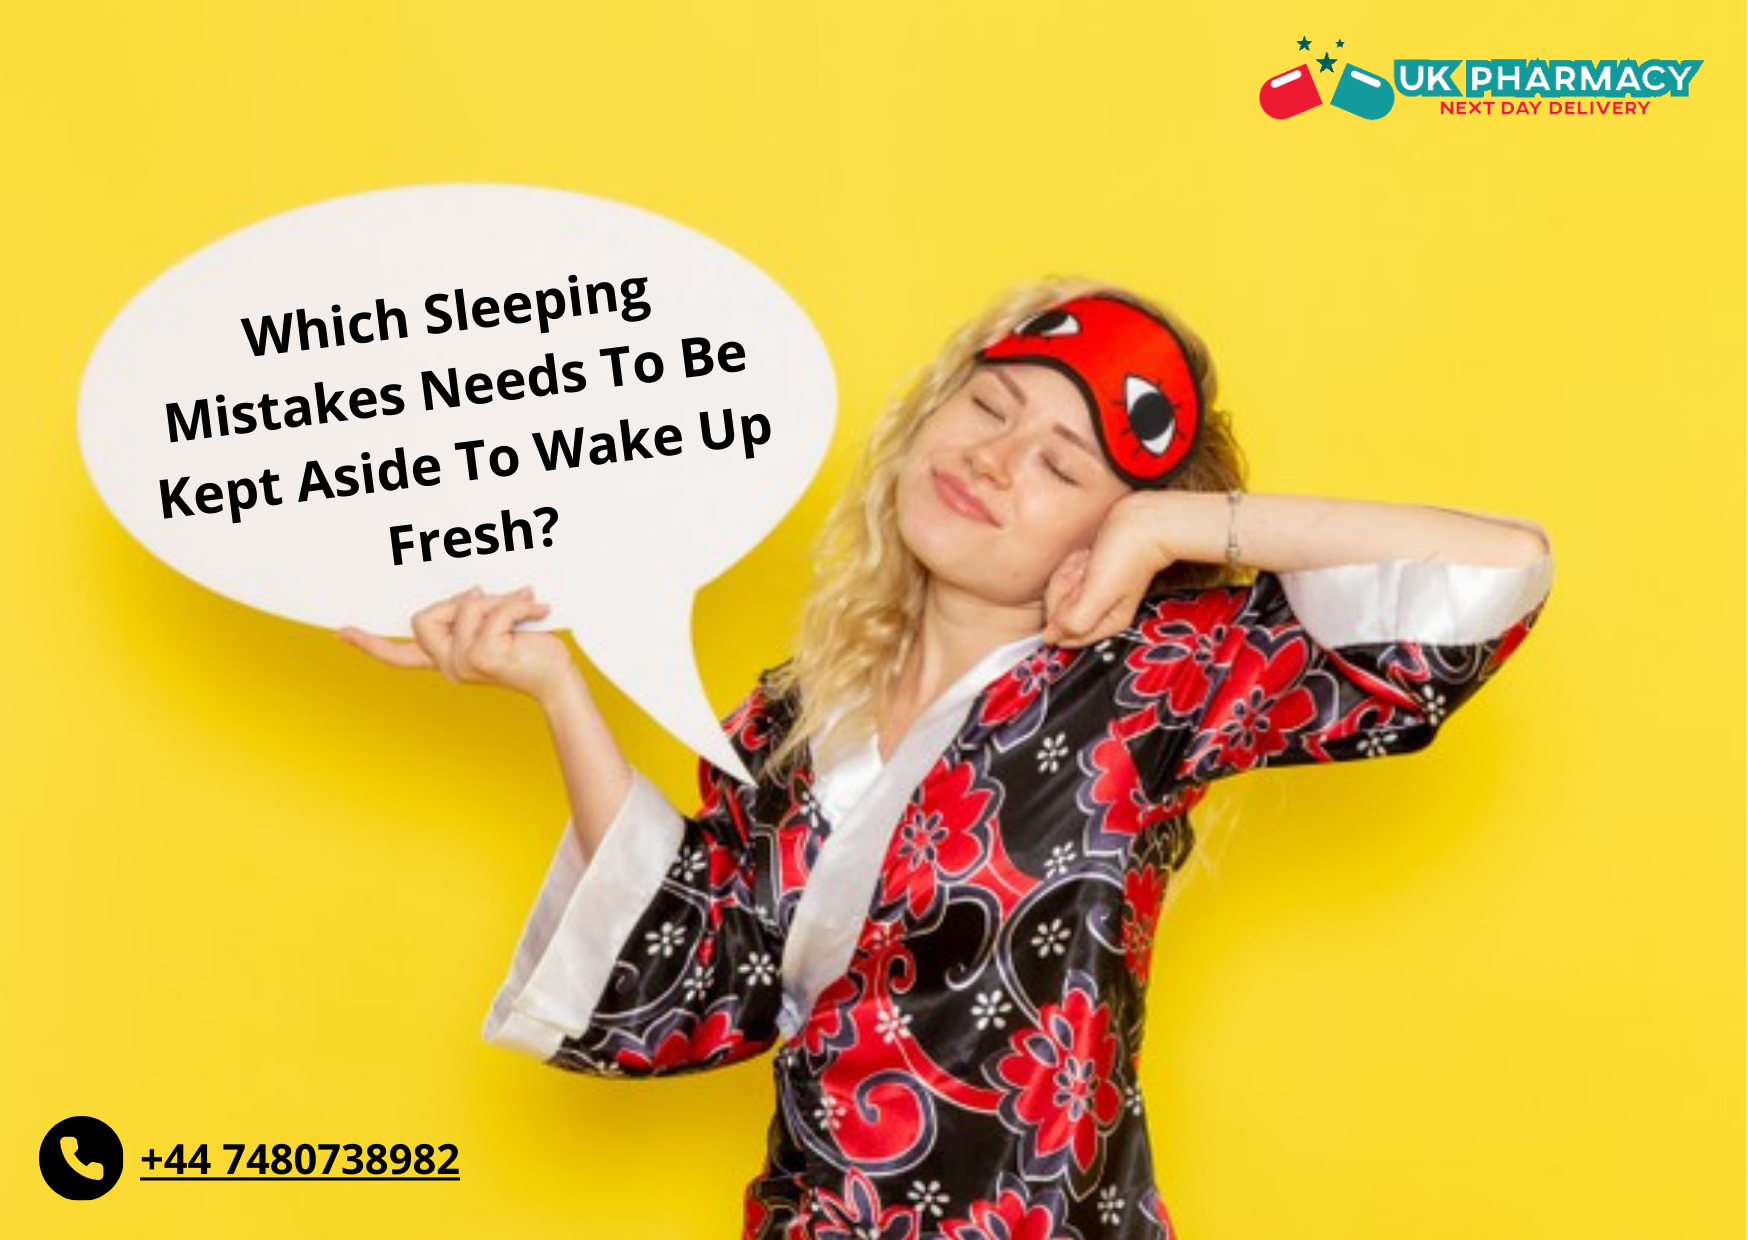 You are currently viewing Which Sleeping Mistakes Needs To Be Kept Aside To Wake Up Fresh?